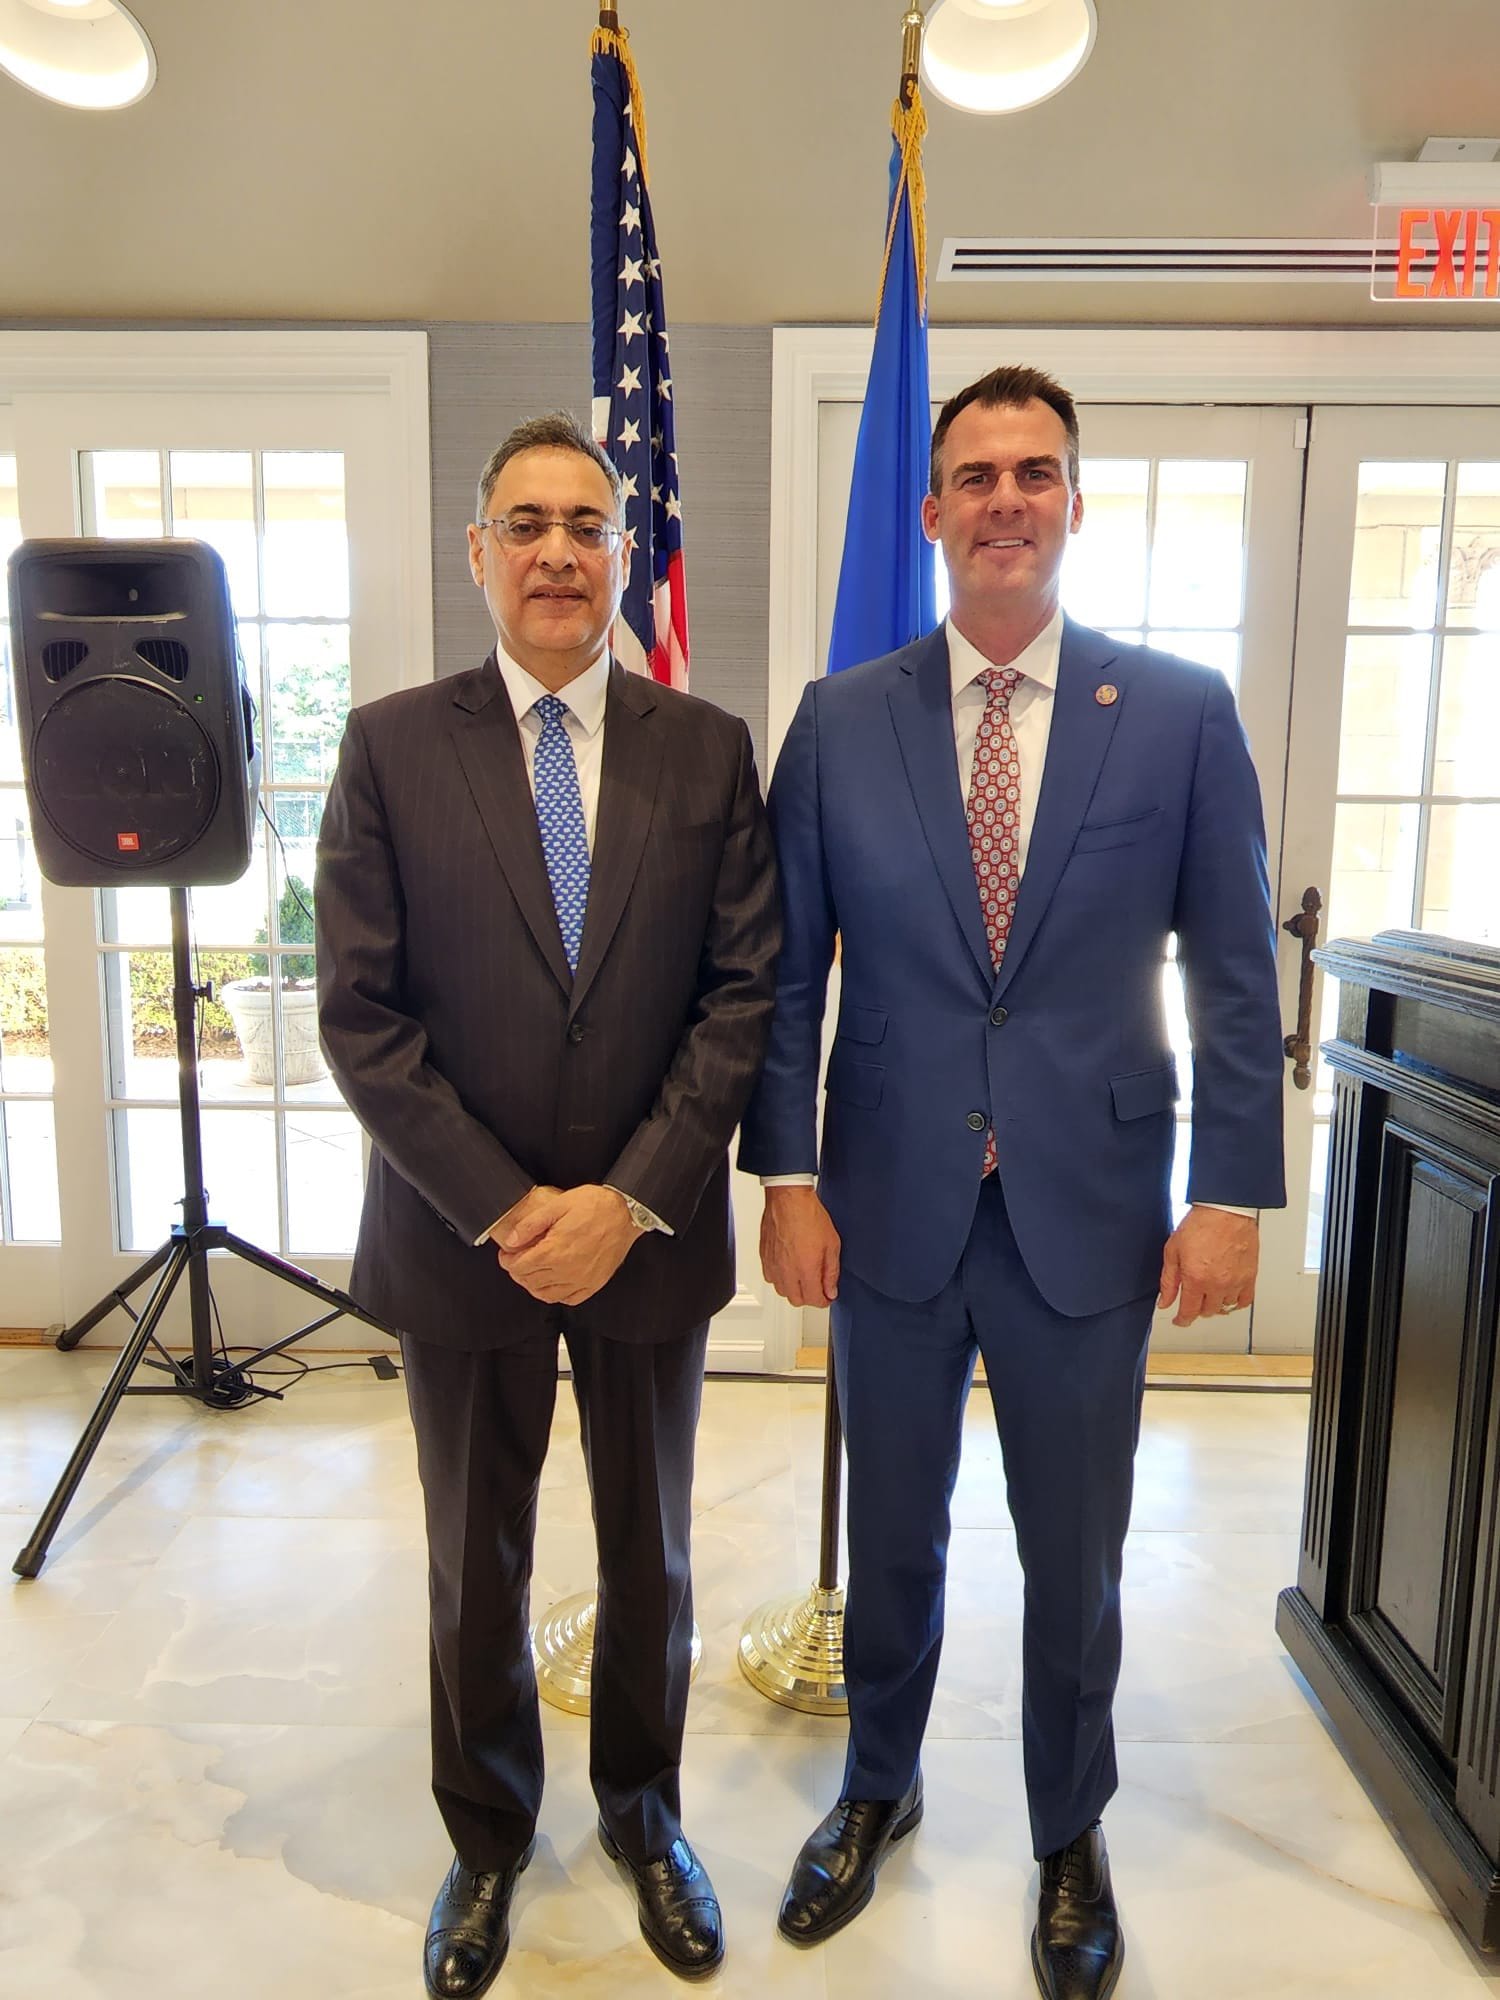 Consul General met the Governor of Oklahoma Kevin Stitt ,on 19 October 2022